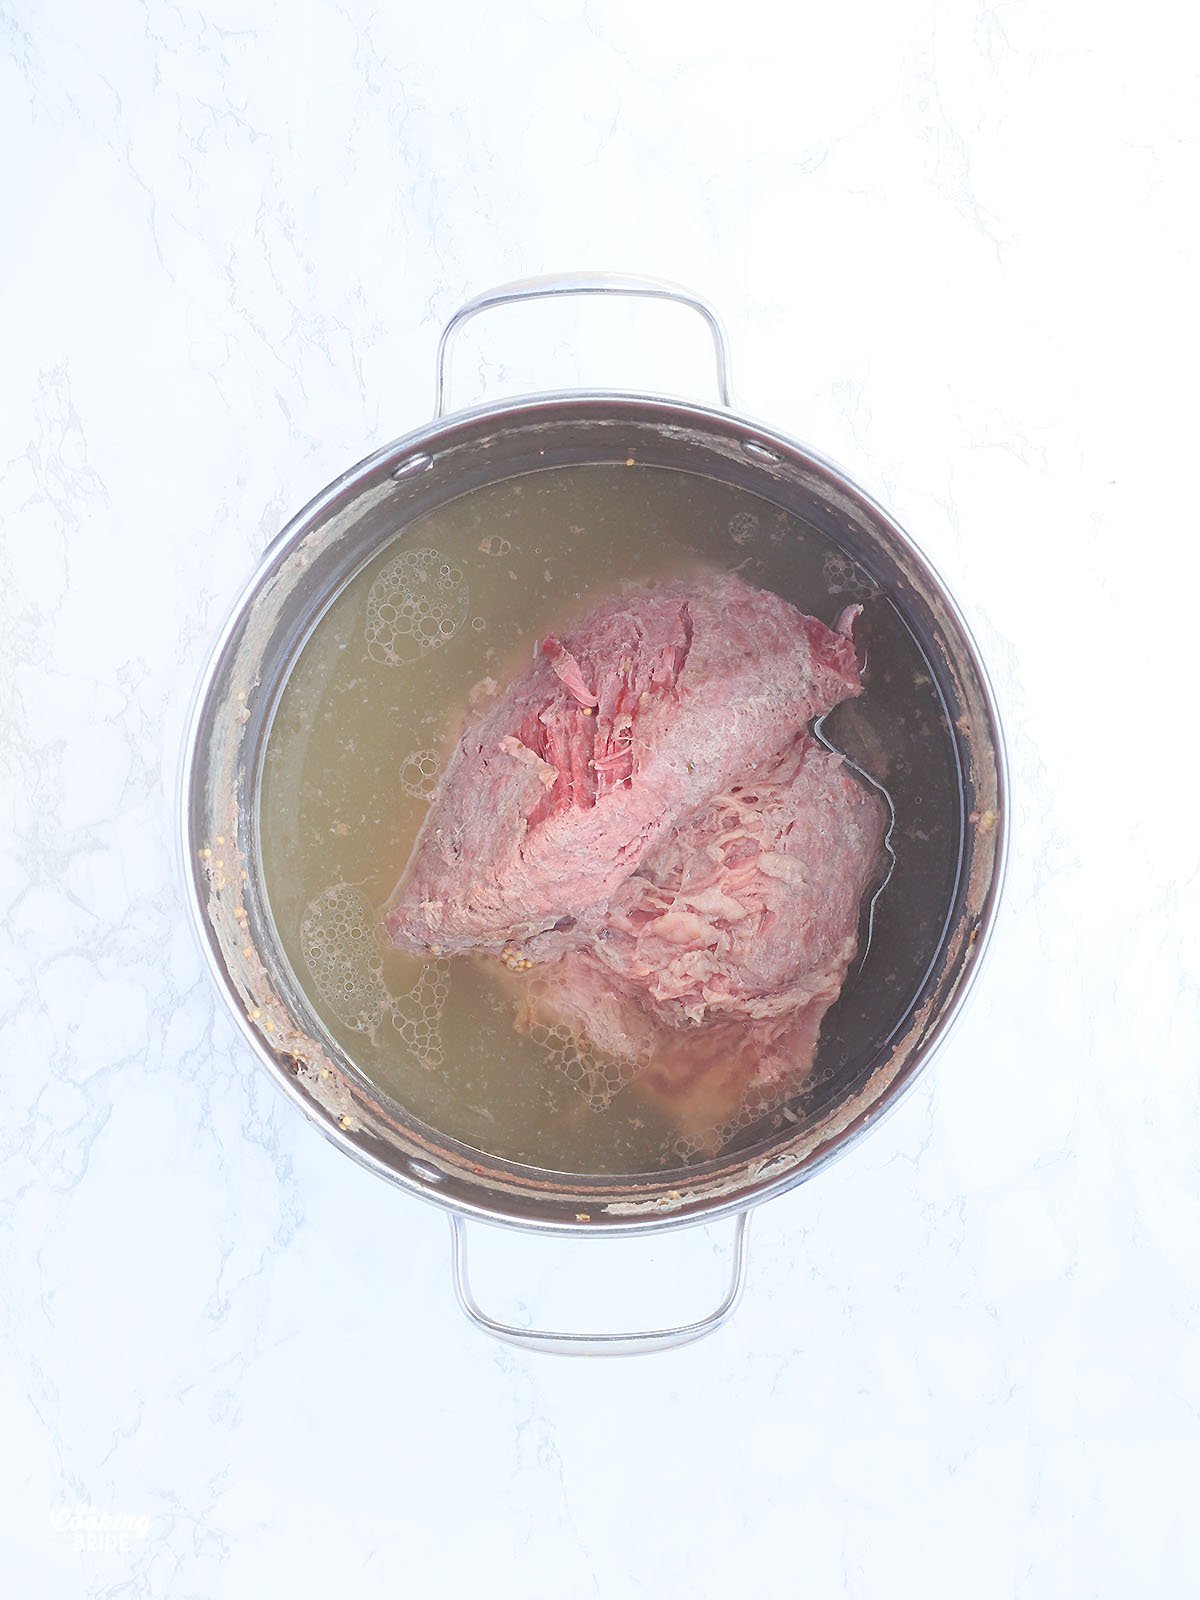 boiled corned beef brisket in a stainless steel stockpot